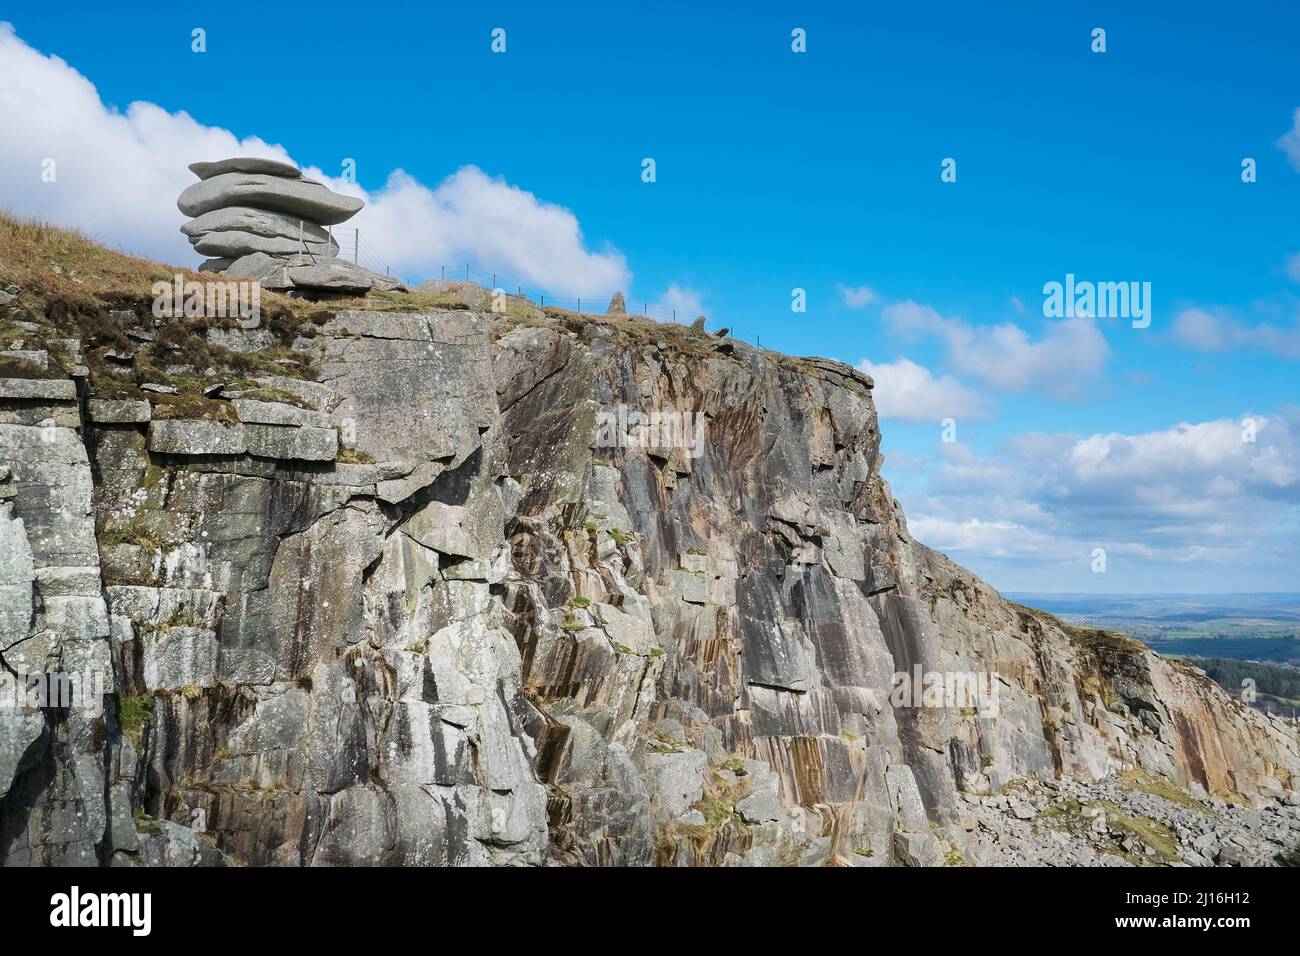 The dramatic stone stack The Cheesewring perched above the rugged Stowes Hill Quarry on Bodmin Moor in Cornwall. Stock Photo